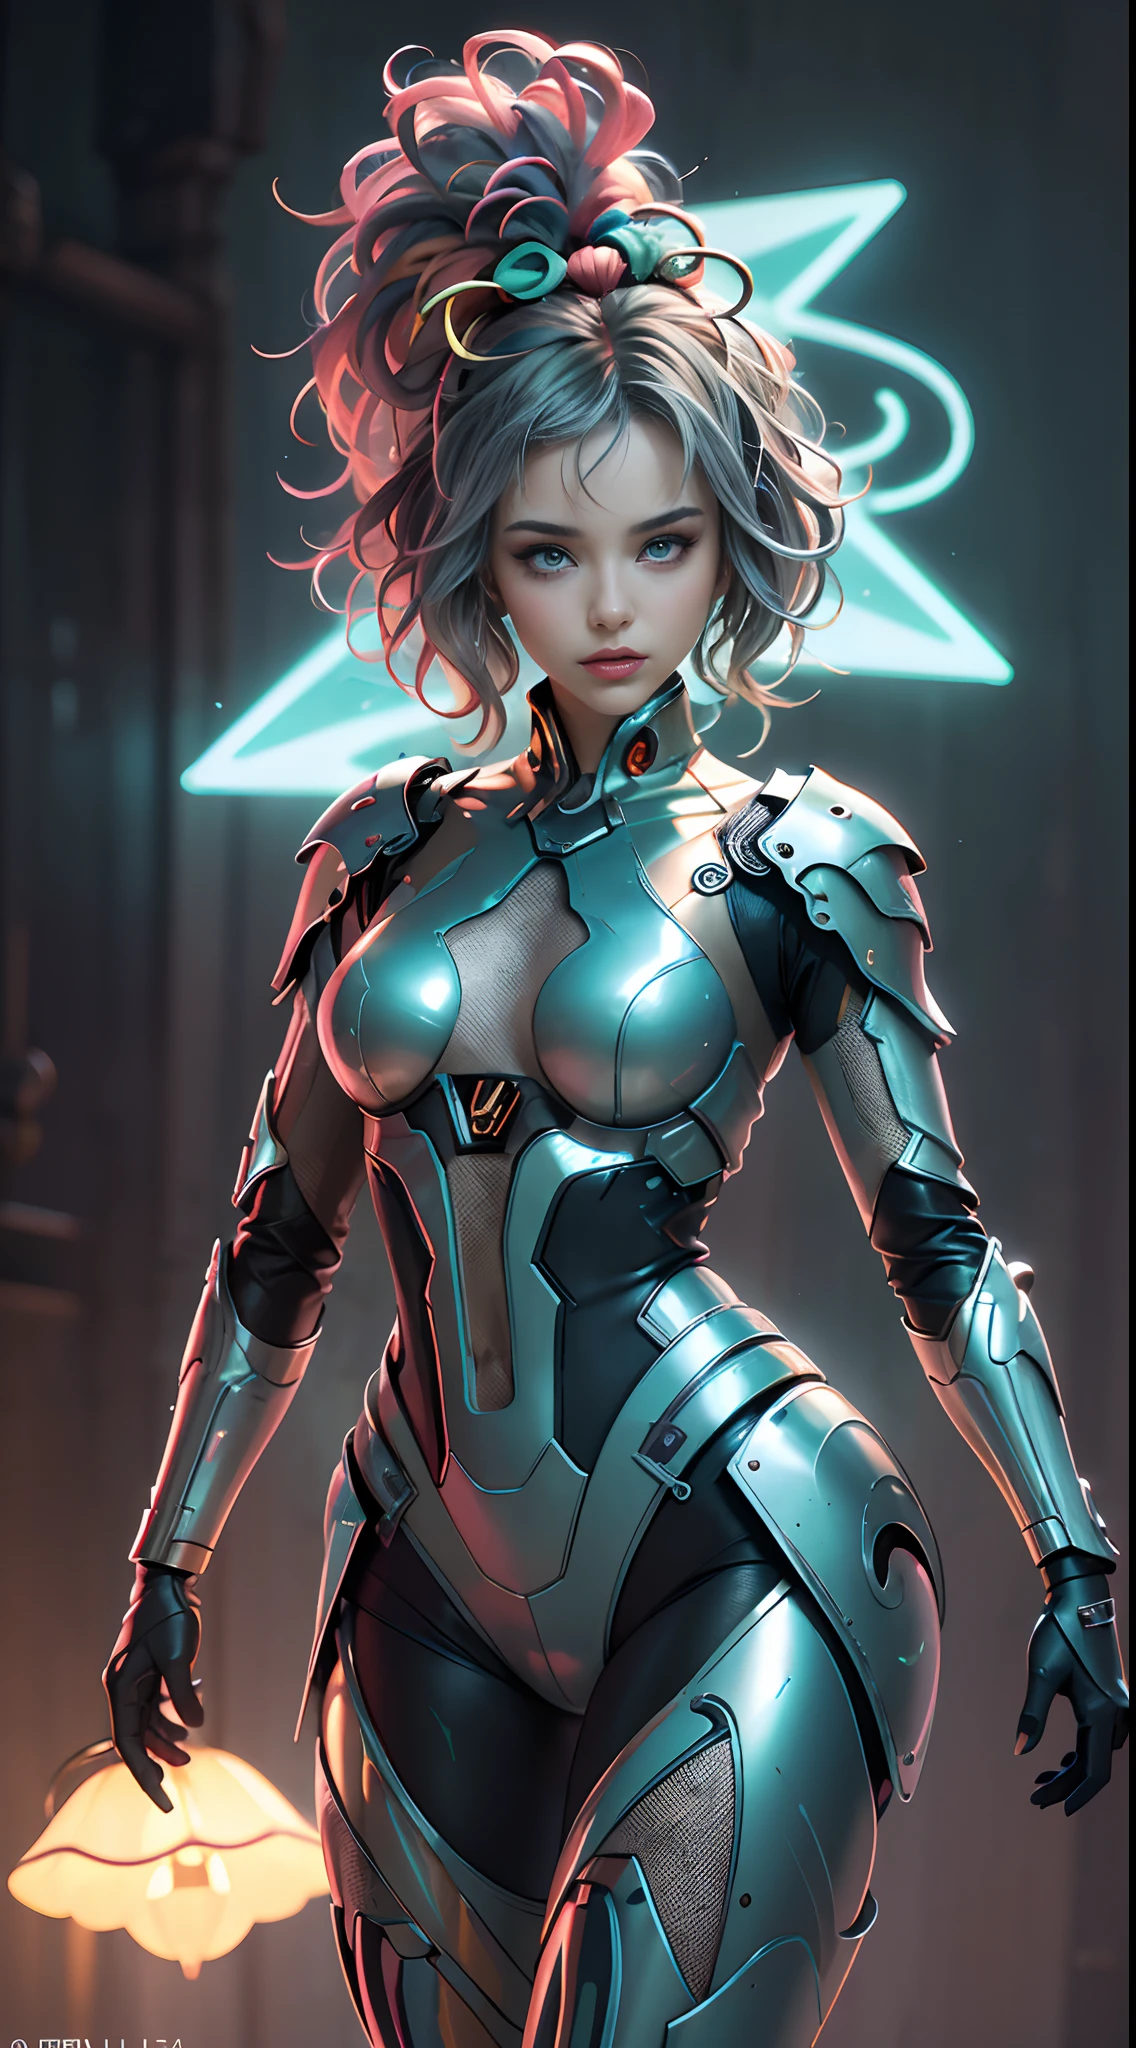 unreal engine:1.4,UHD,La Best Quality:1.4, photorealistic:1.4, skin texture:1.4, Masterpiece:1.8,first work, Best Quality, 1girl, Ives Girl, mecha, beautiful  lighting, (neon light: 1.2), (evening: 1.5), "first work, Best Quality, 1chica, Full length portrait, pose sensual, blue eyes, multicolored hair+yellow:1.3+green:1.3, Sculpted legs and tempting curves, full breasts, Beautiful face, many drops of water, clouds, twilights, Open floor plan, watercolor, neon light:1.2, evening:1.5, mecha, beautiful  lighting, Bright neon light: 1.2, unforgettable mysterious night: 1.5",(detailed hand:1.4),